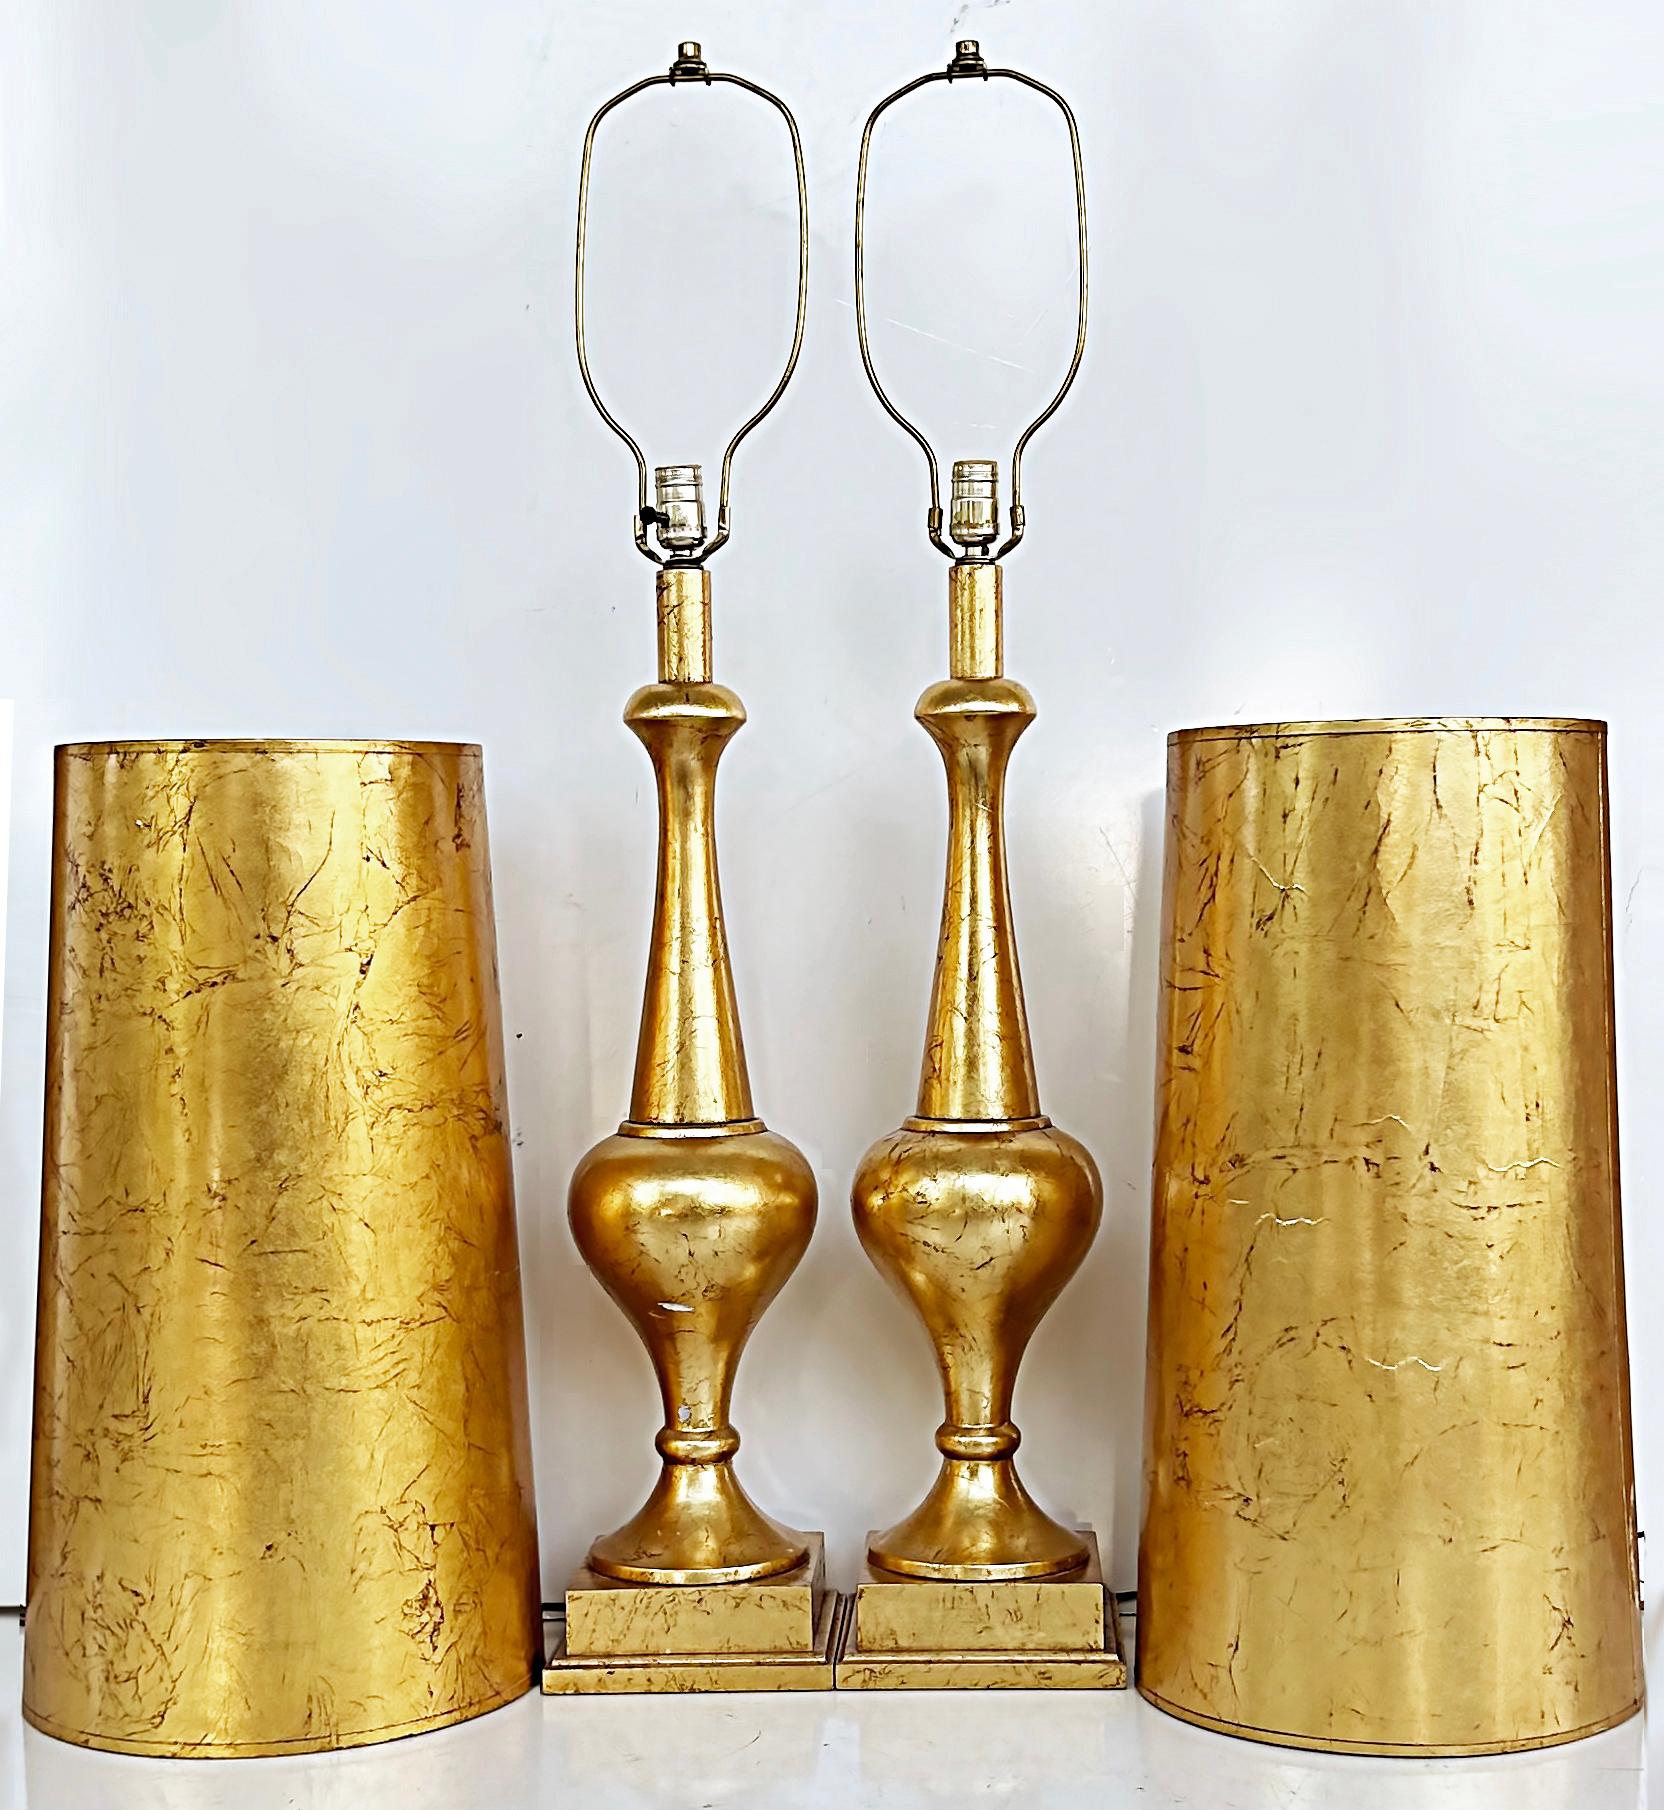 Midcentury Pair Italian Tall Gold Leaf Turned Wood Table Lamps with Gilt Shades

Offered for sale is a tall pair of turned wood table lamps that had previously been gold leaf gilt and fitted with slender gold leaf gilt shades. The lamps have a